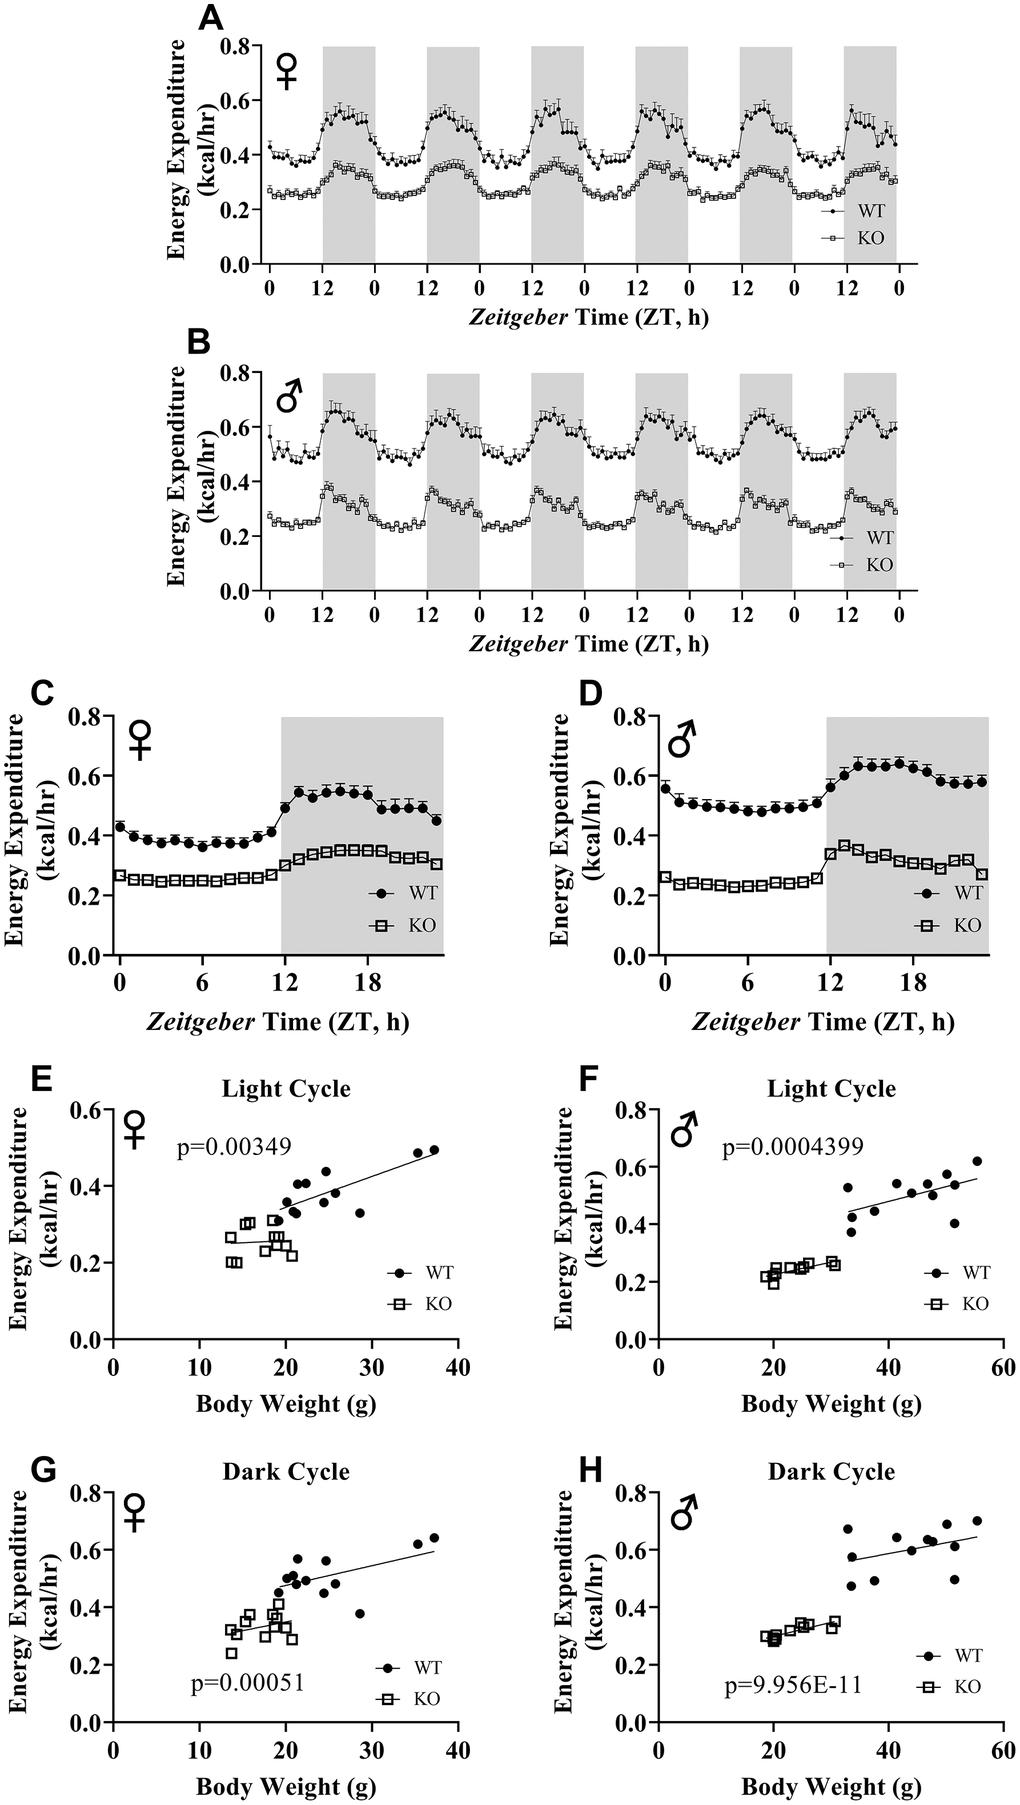 ANCOVA shows that GH-deficiency reduces metabolic rate. Energy expenditure values for 6 days for female (A) and male (B) GHRH-/- and WT mice. 6 days of energy expenditure data were averaged into a single day for female (C) and male (D) mice. Analysis of energy expenditure with body weight as a co-variant for female (E, G) and male (F, H) GHRH-/- and WT mice in light cycles (E, F) and dark cycles. (G, H) Female WT n=12, GHRH-/- n=12, male WT n=12, GHRH-/- n=11. Each bar represents mean ± SEM. The WT and GHRH-/- groups were statistically analyzed with ANCOVA method, which was used to calculate p values, shown on panels E-H.